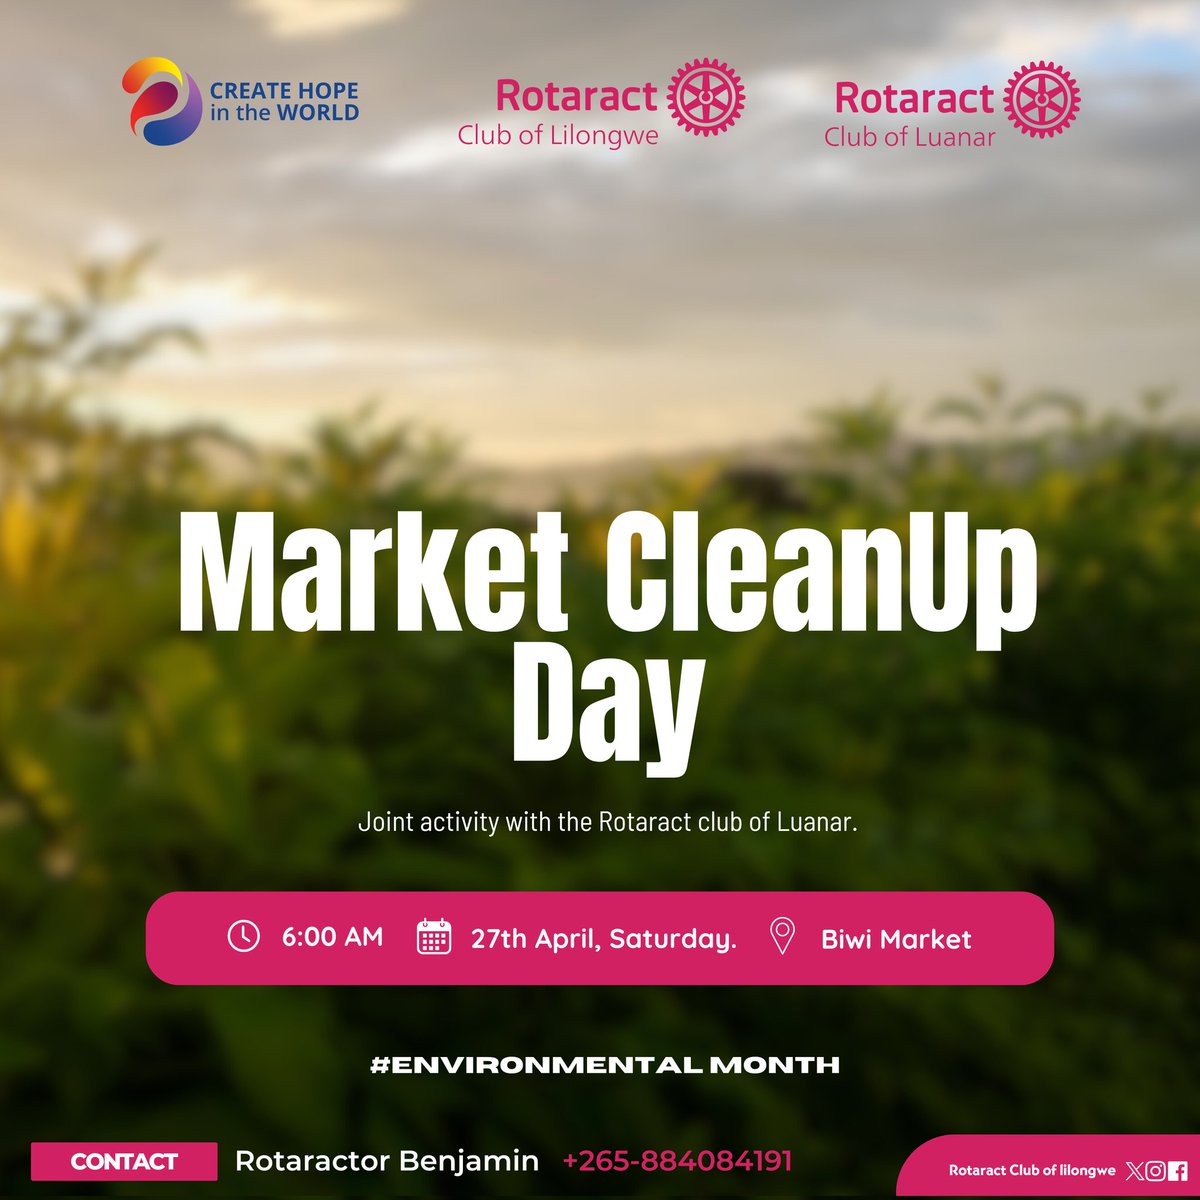 Join us this Saturday, April 27th, at 6 AM, as the Rotaract Clubs of Lilongwe and Launar CTC unite for a joint market cleanup at Biwi Market in Area 36! Let's make a difference together!!!

#EnvironmetalMonth #CleanUp #CommunityService #Rotaract